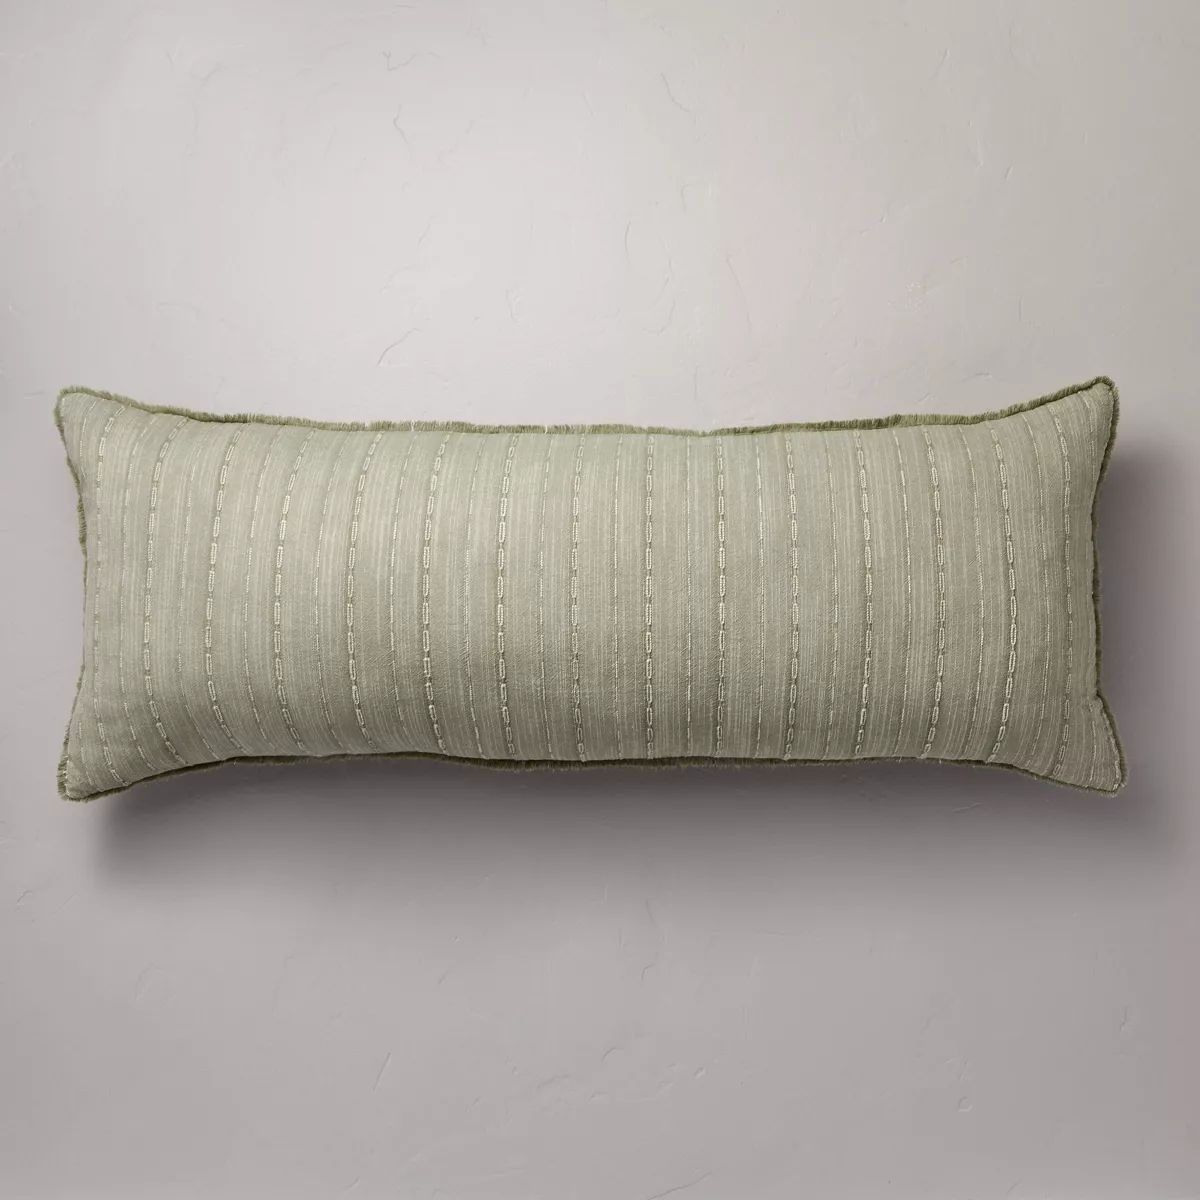 16"x42" Washed Loop Stripe Lumbar Bed Pillow  - Hearth & Hand™ with Magnolia | Target